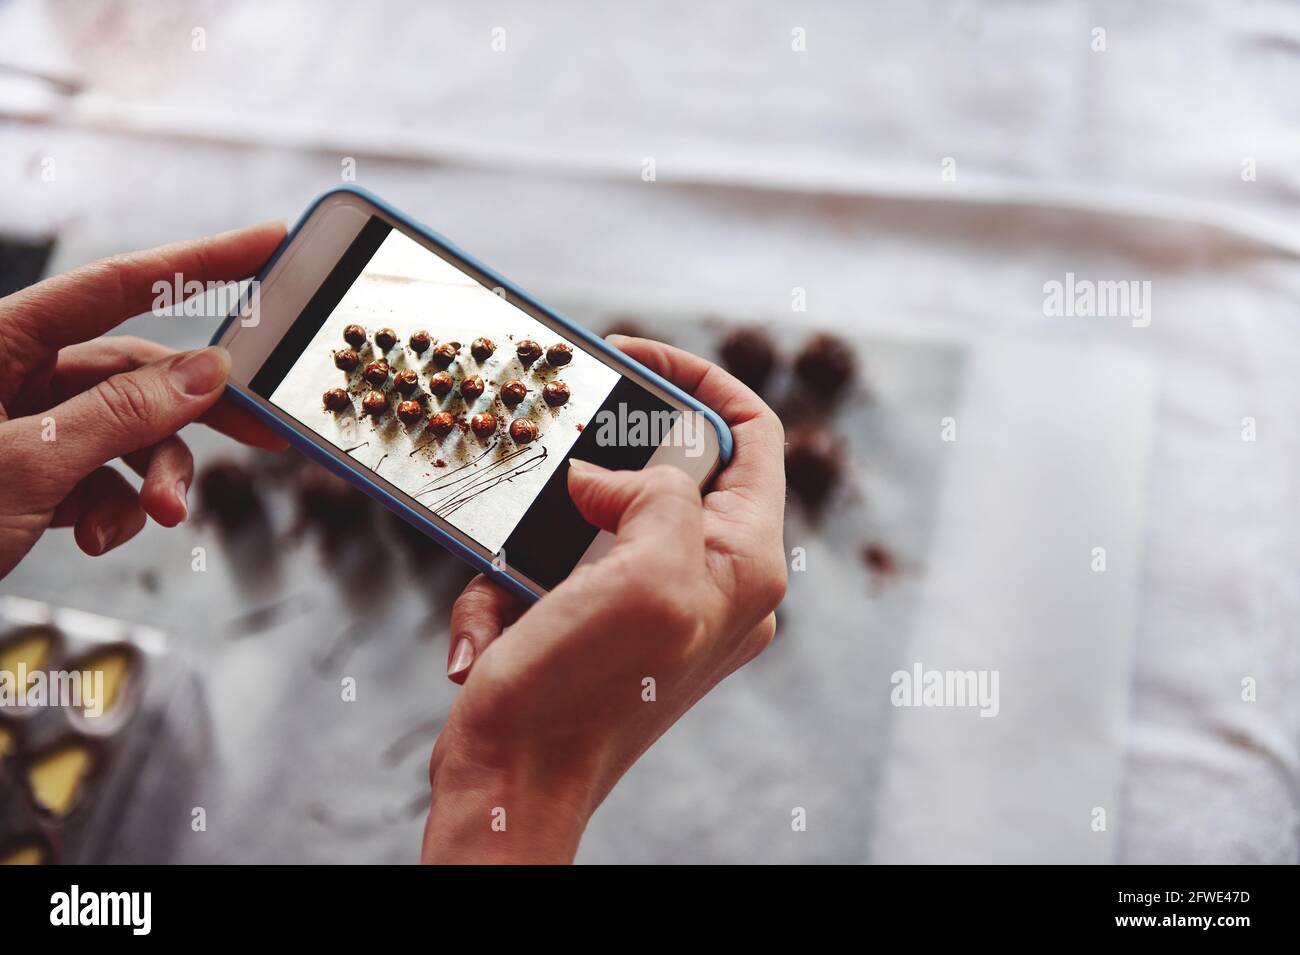 Closeup of hands holding mobile phone and making photography of delicious chocolate pralines on a white tablecloth. Mobile phone in live view regime. Stock Photo